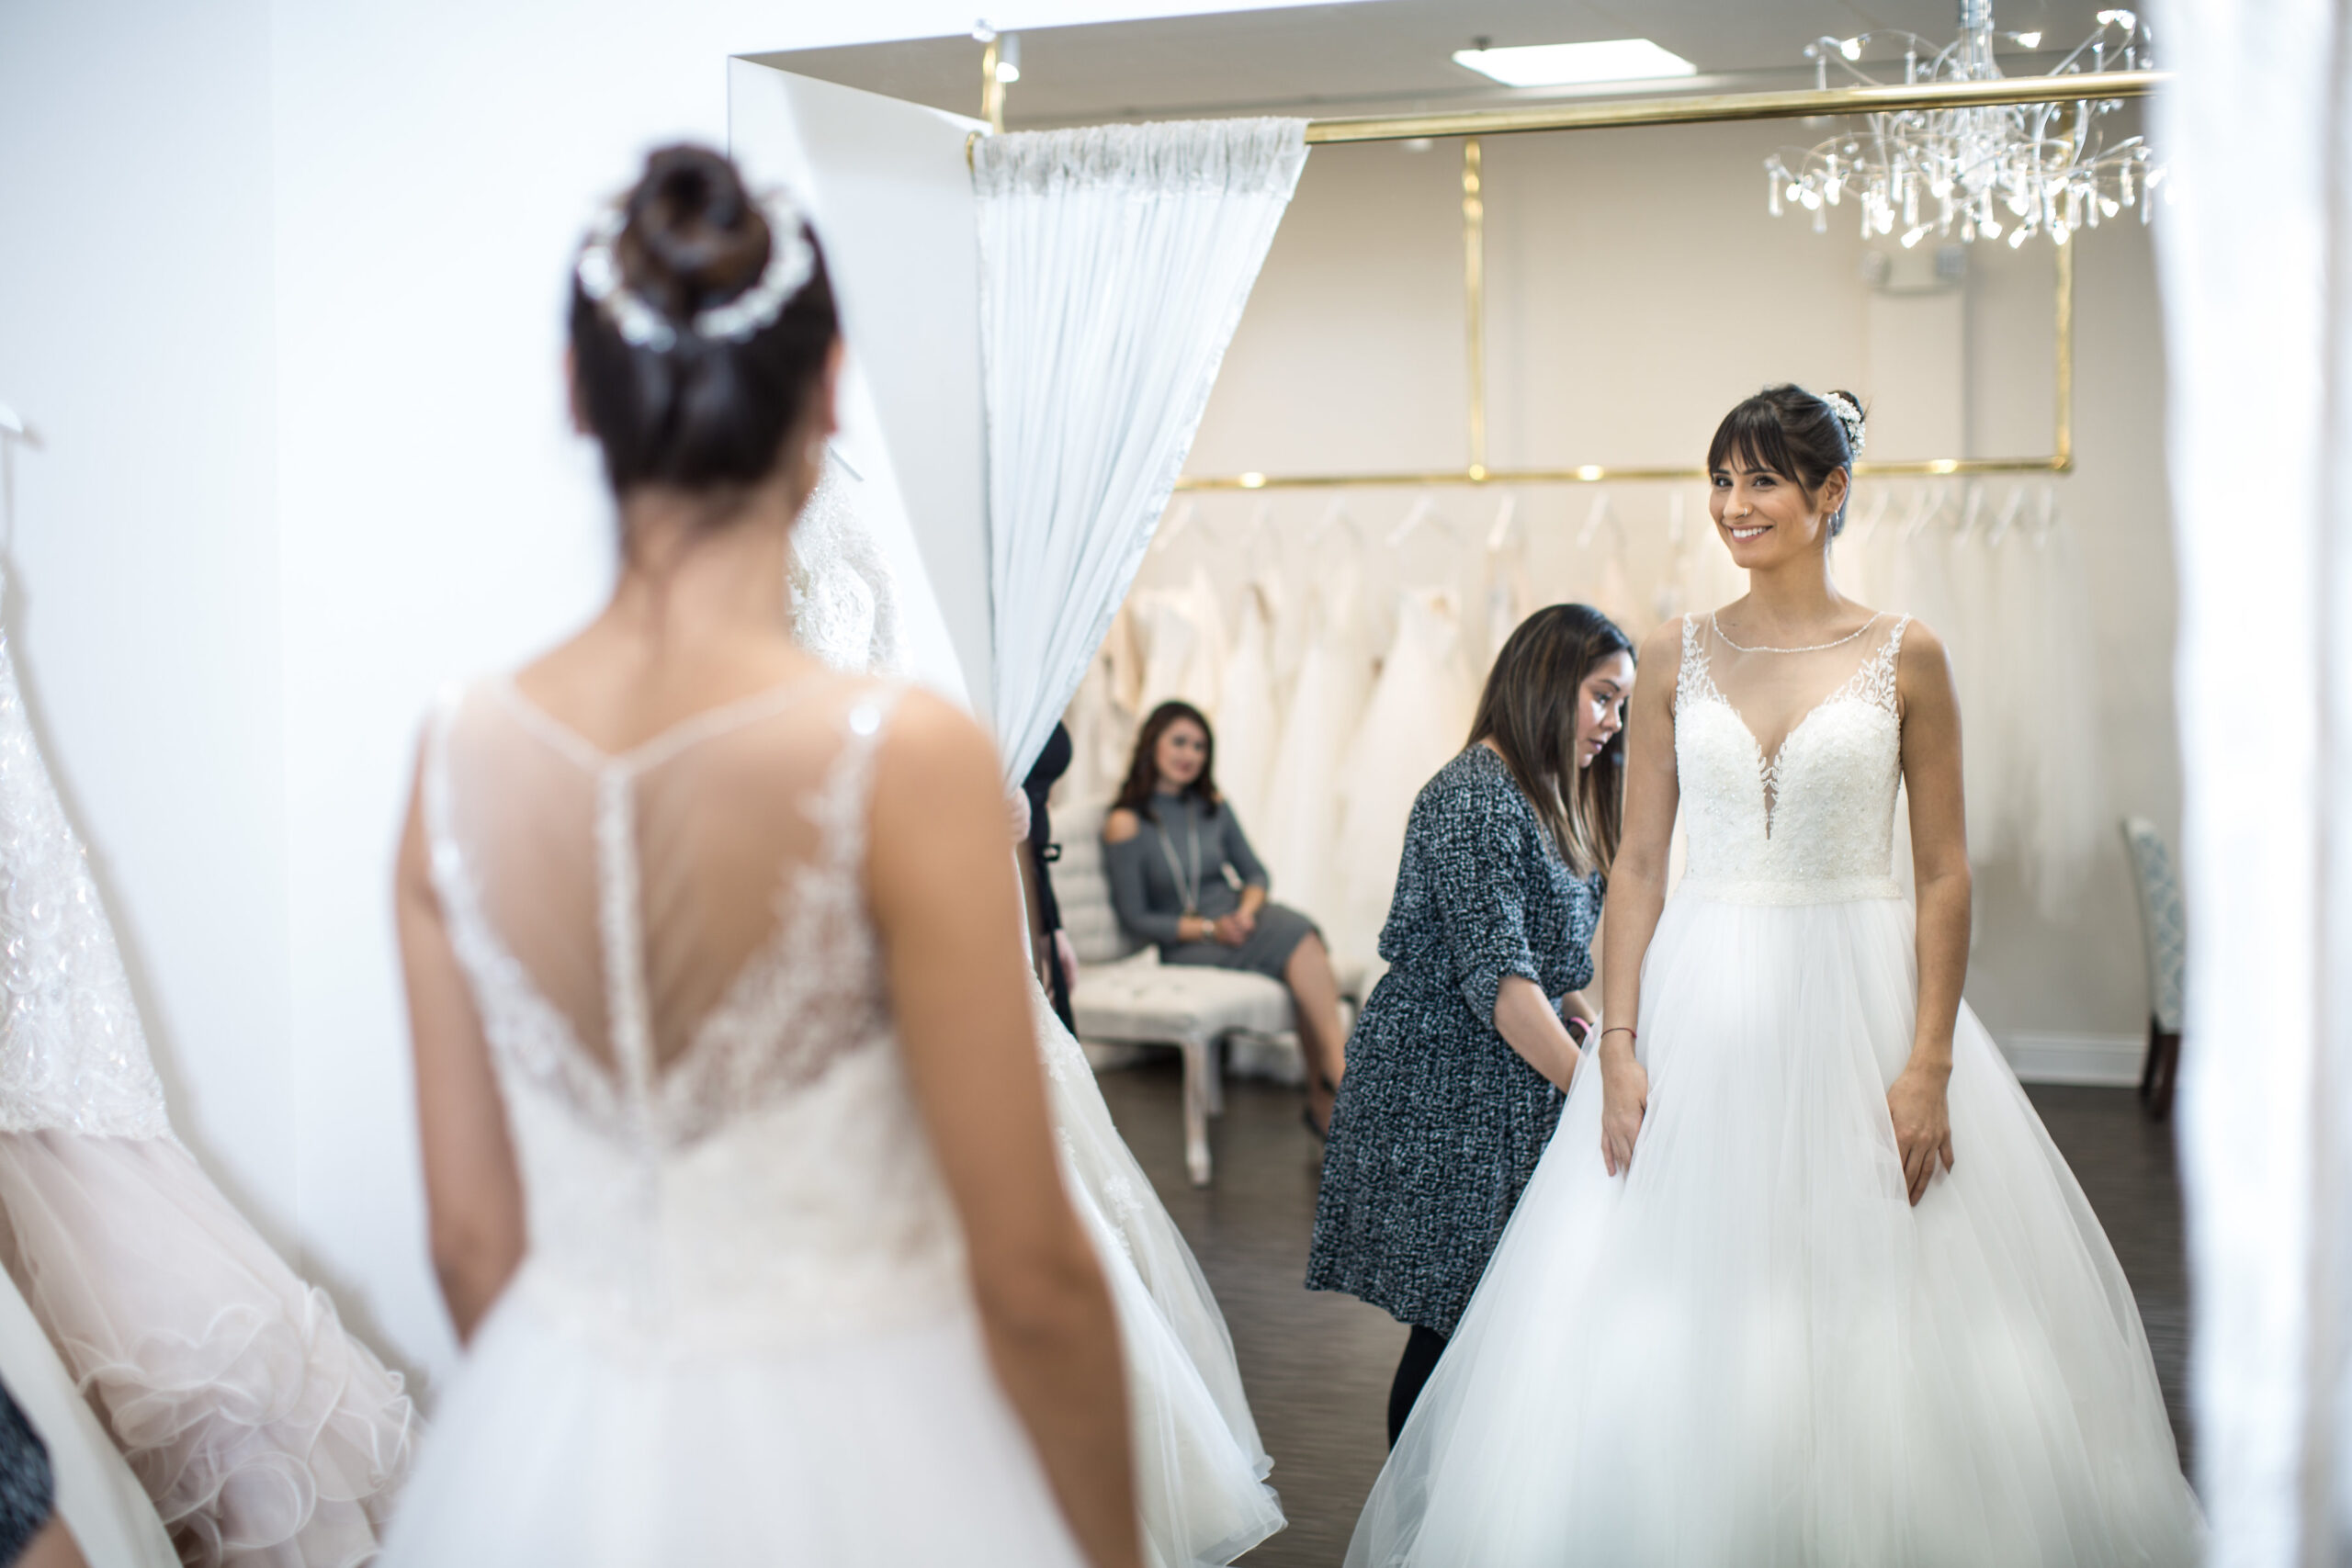 Bride to be standing in mirror looking at herself wearing a wedding gown while the sales person behind her adjusts the train.